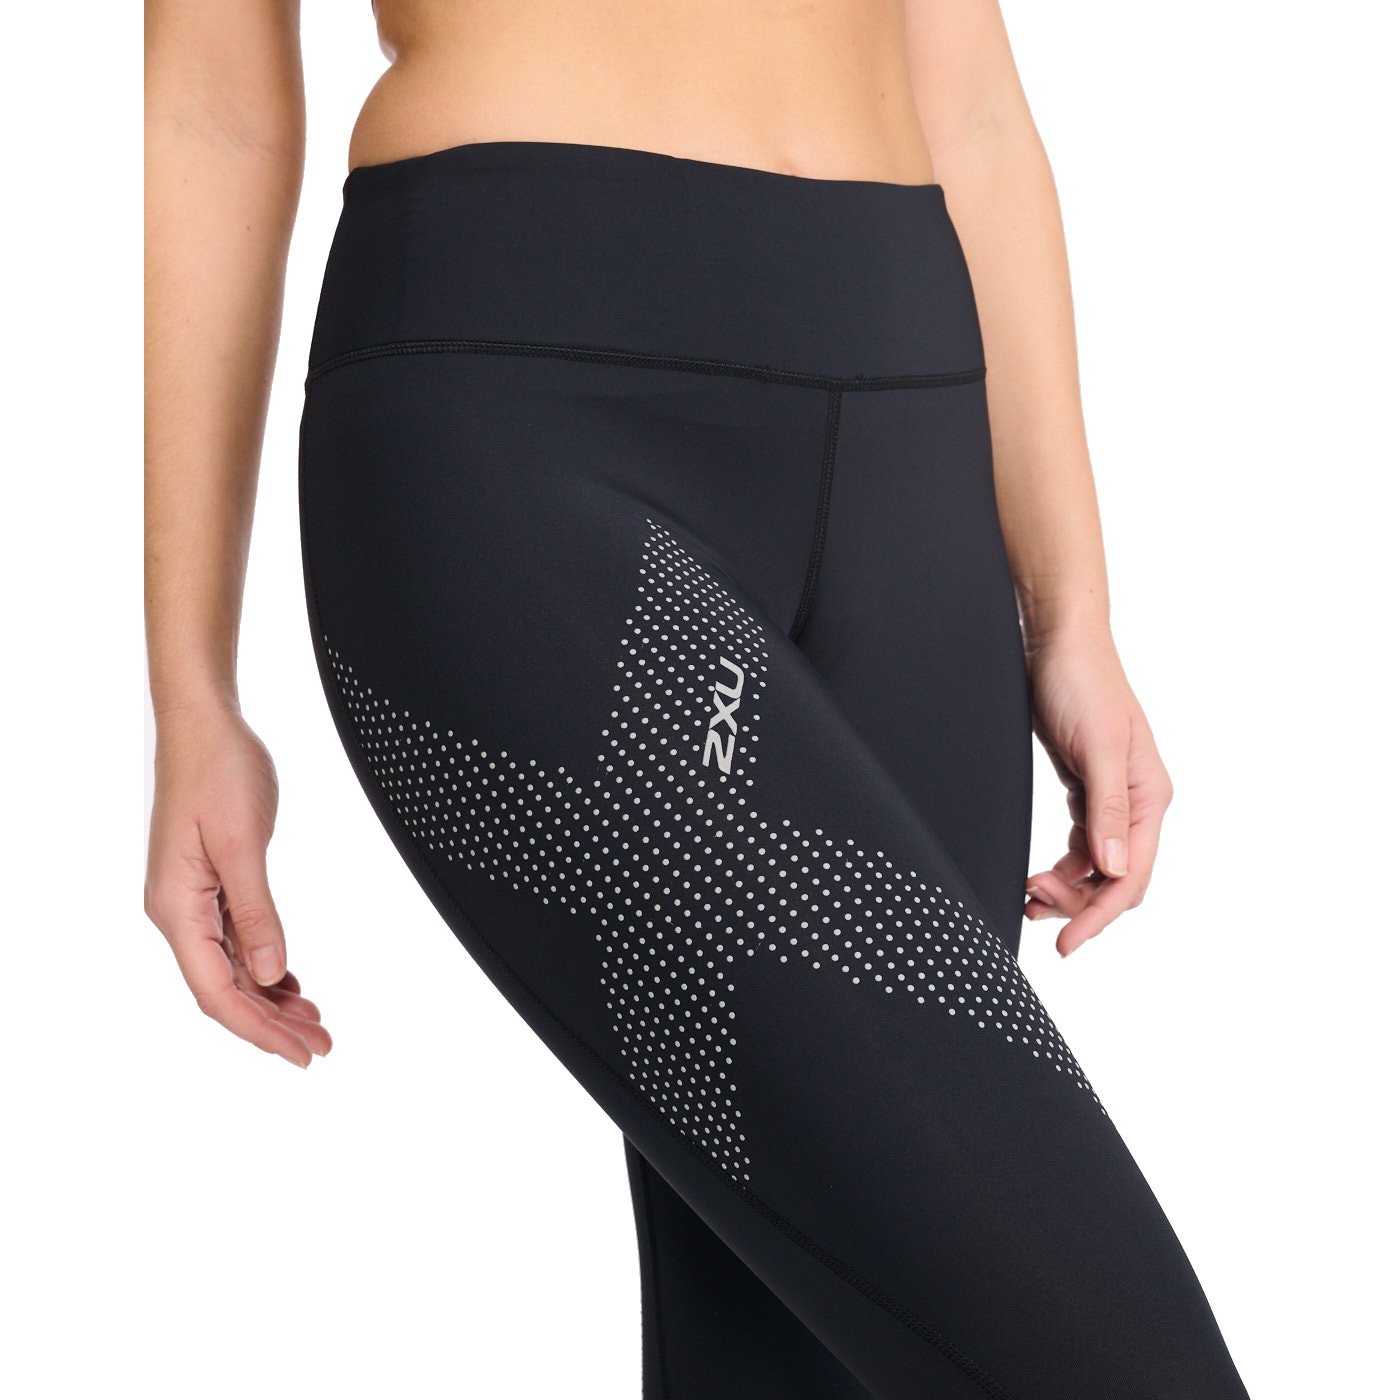 2XU Women's Mid-Rise 7/8 Compression Tights - black/dotted silver reflective